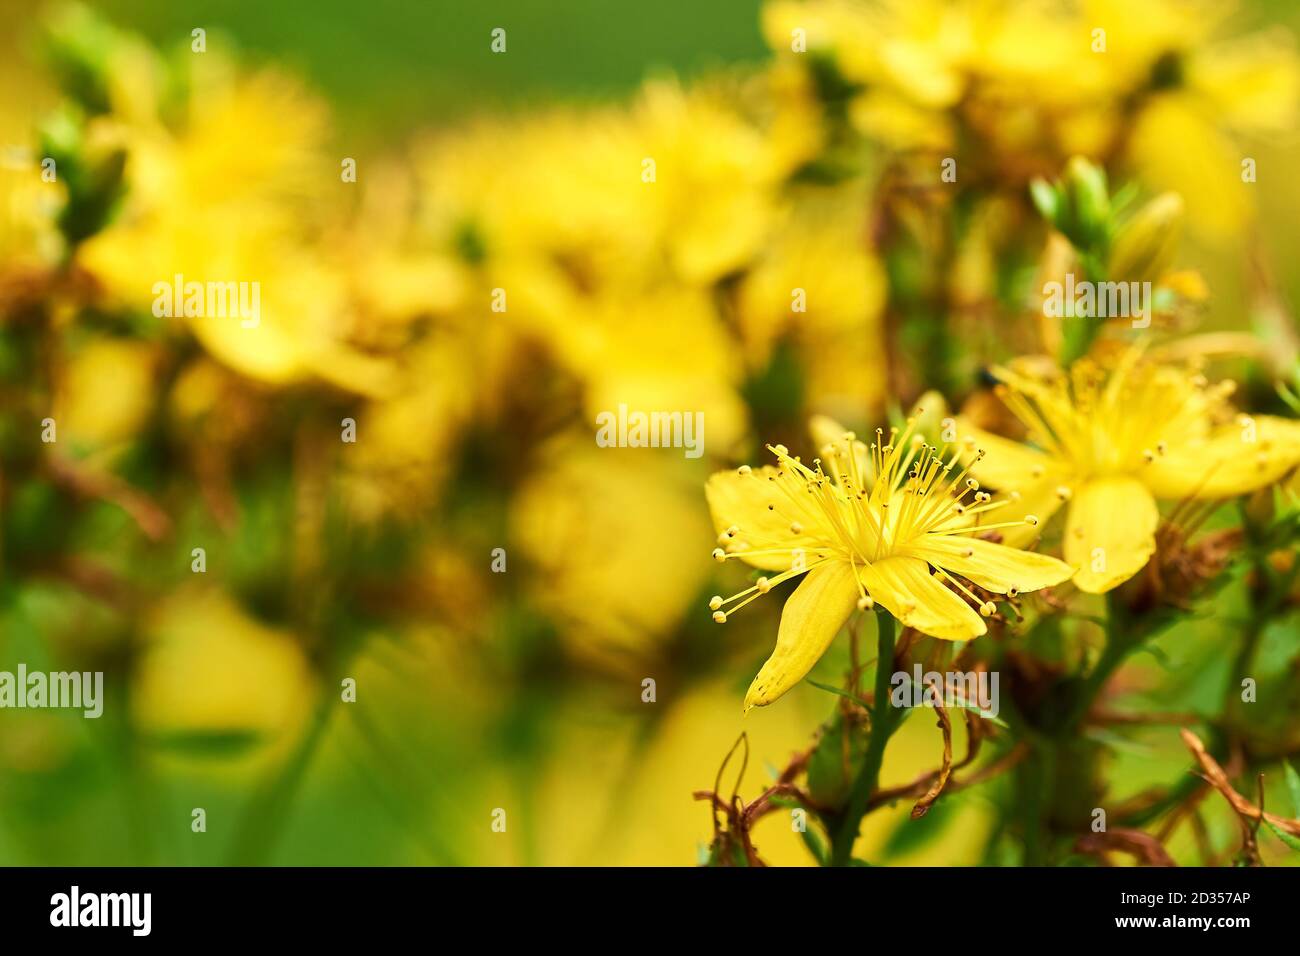 Close-up photo of St. John's wort flower with defocused yellow-green summer meadow background. Stock Photo